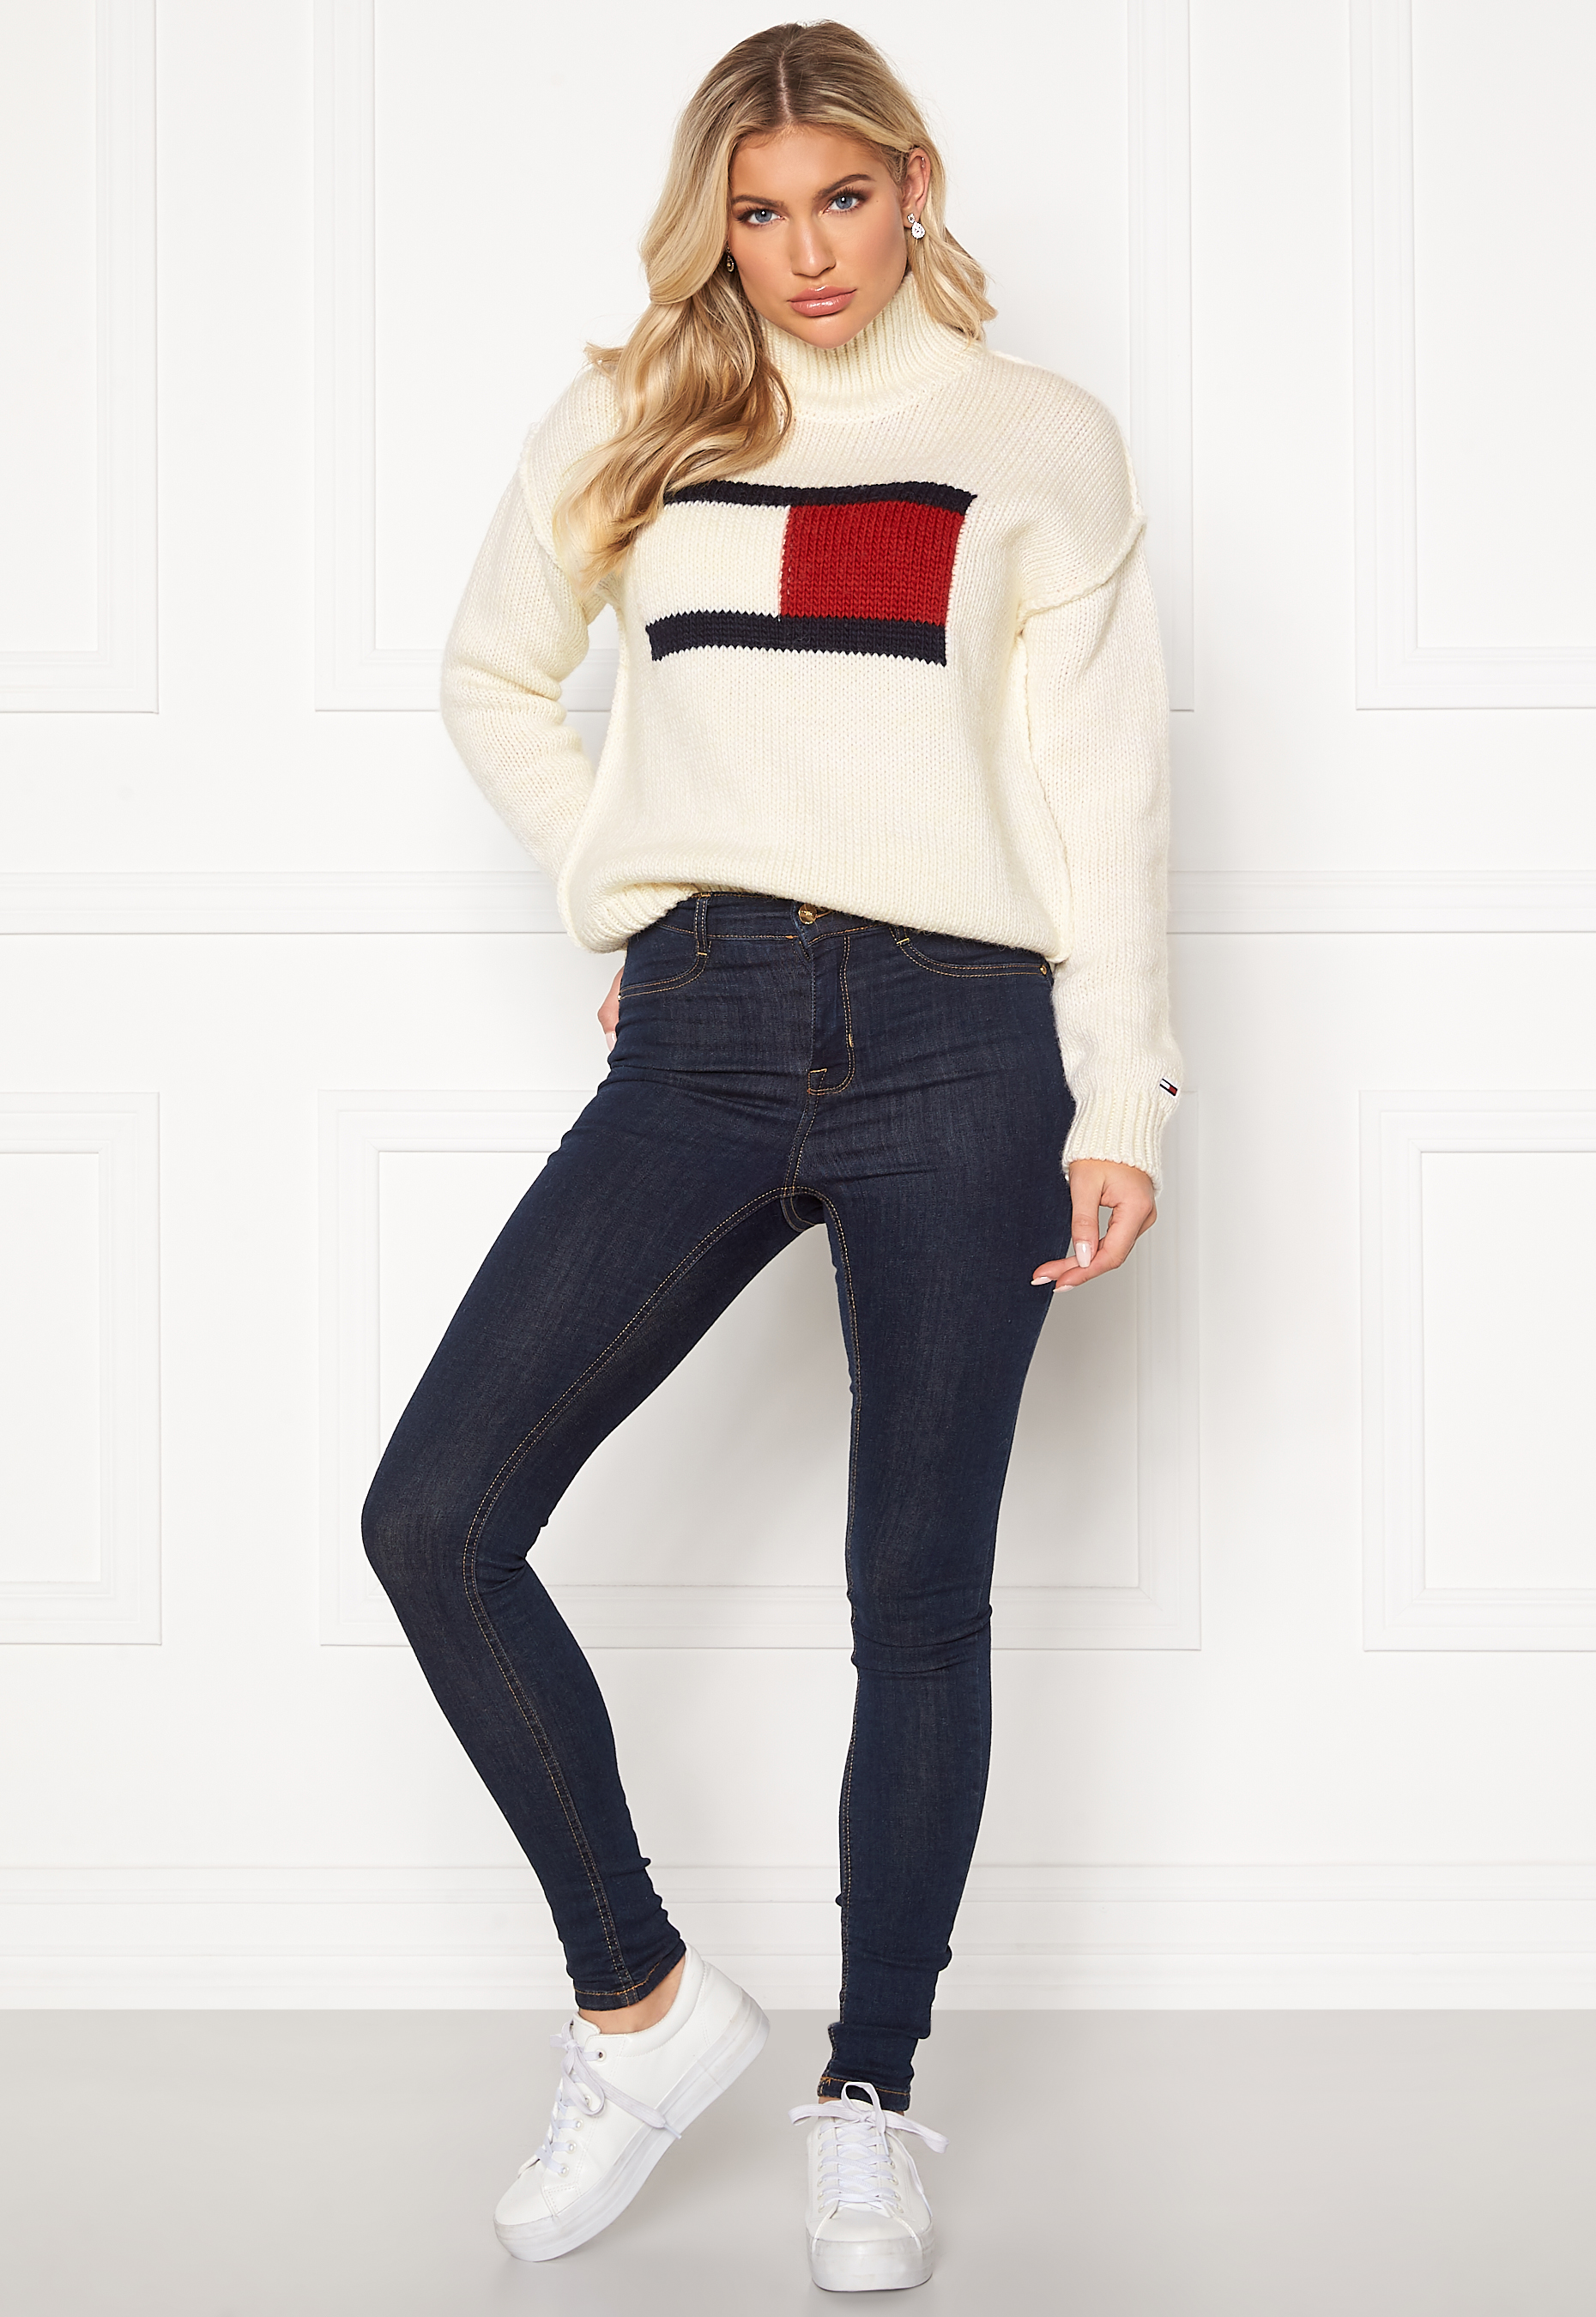 tommy flag sweater